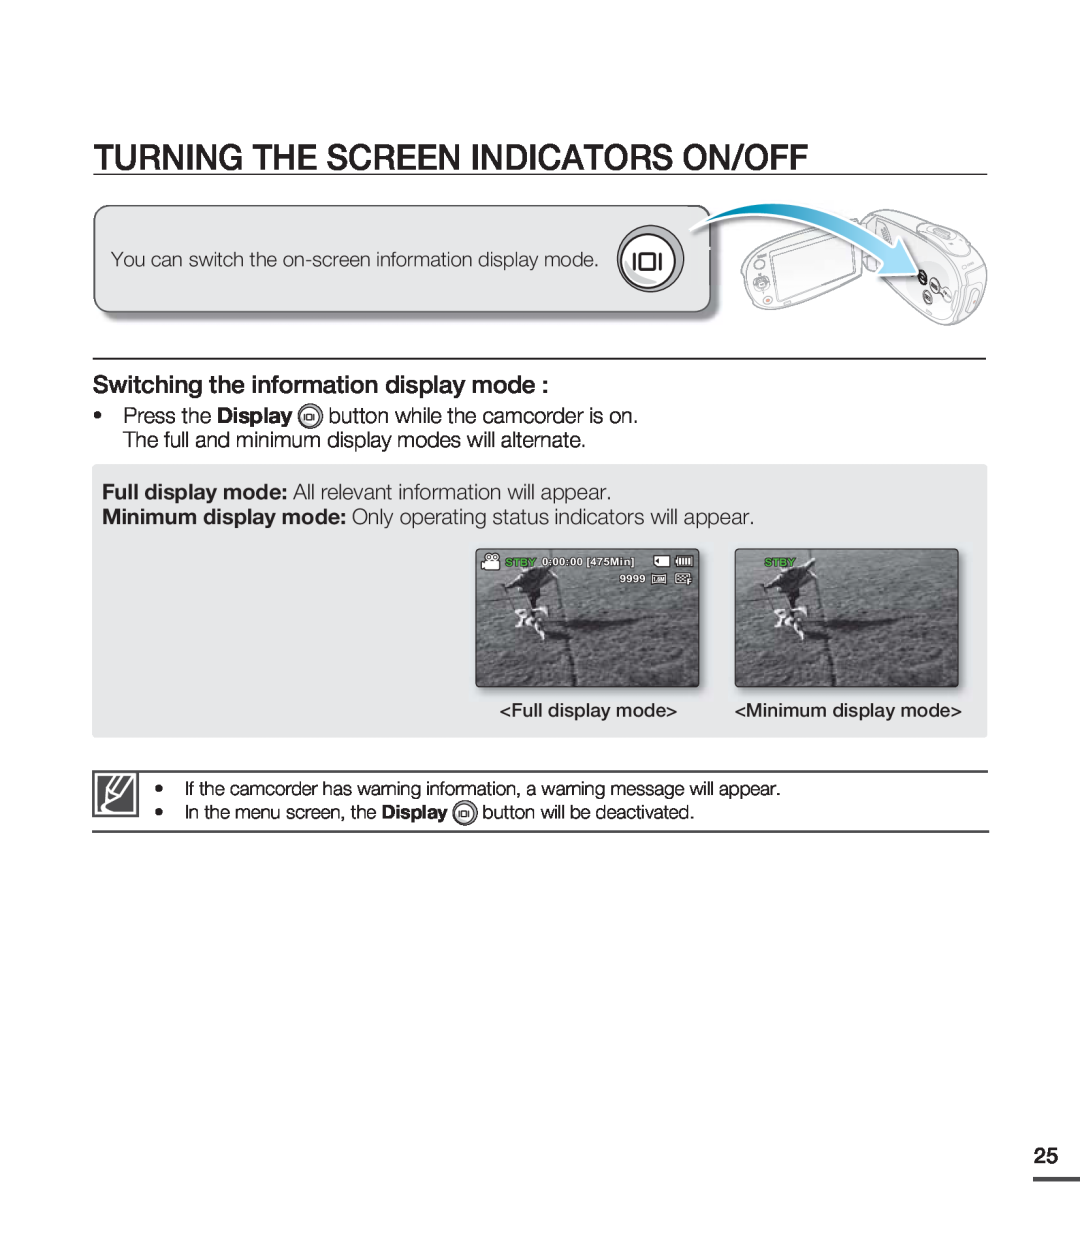 Samsung SMX-C20BP/XIL, SMX-C24BP/EDC manual Turning The Screen Indicators On/Off, Switching the information display mode 